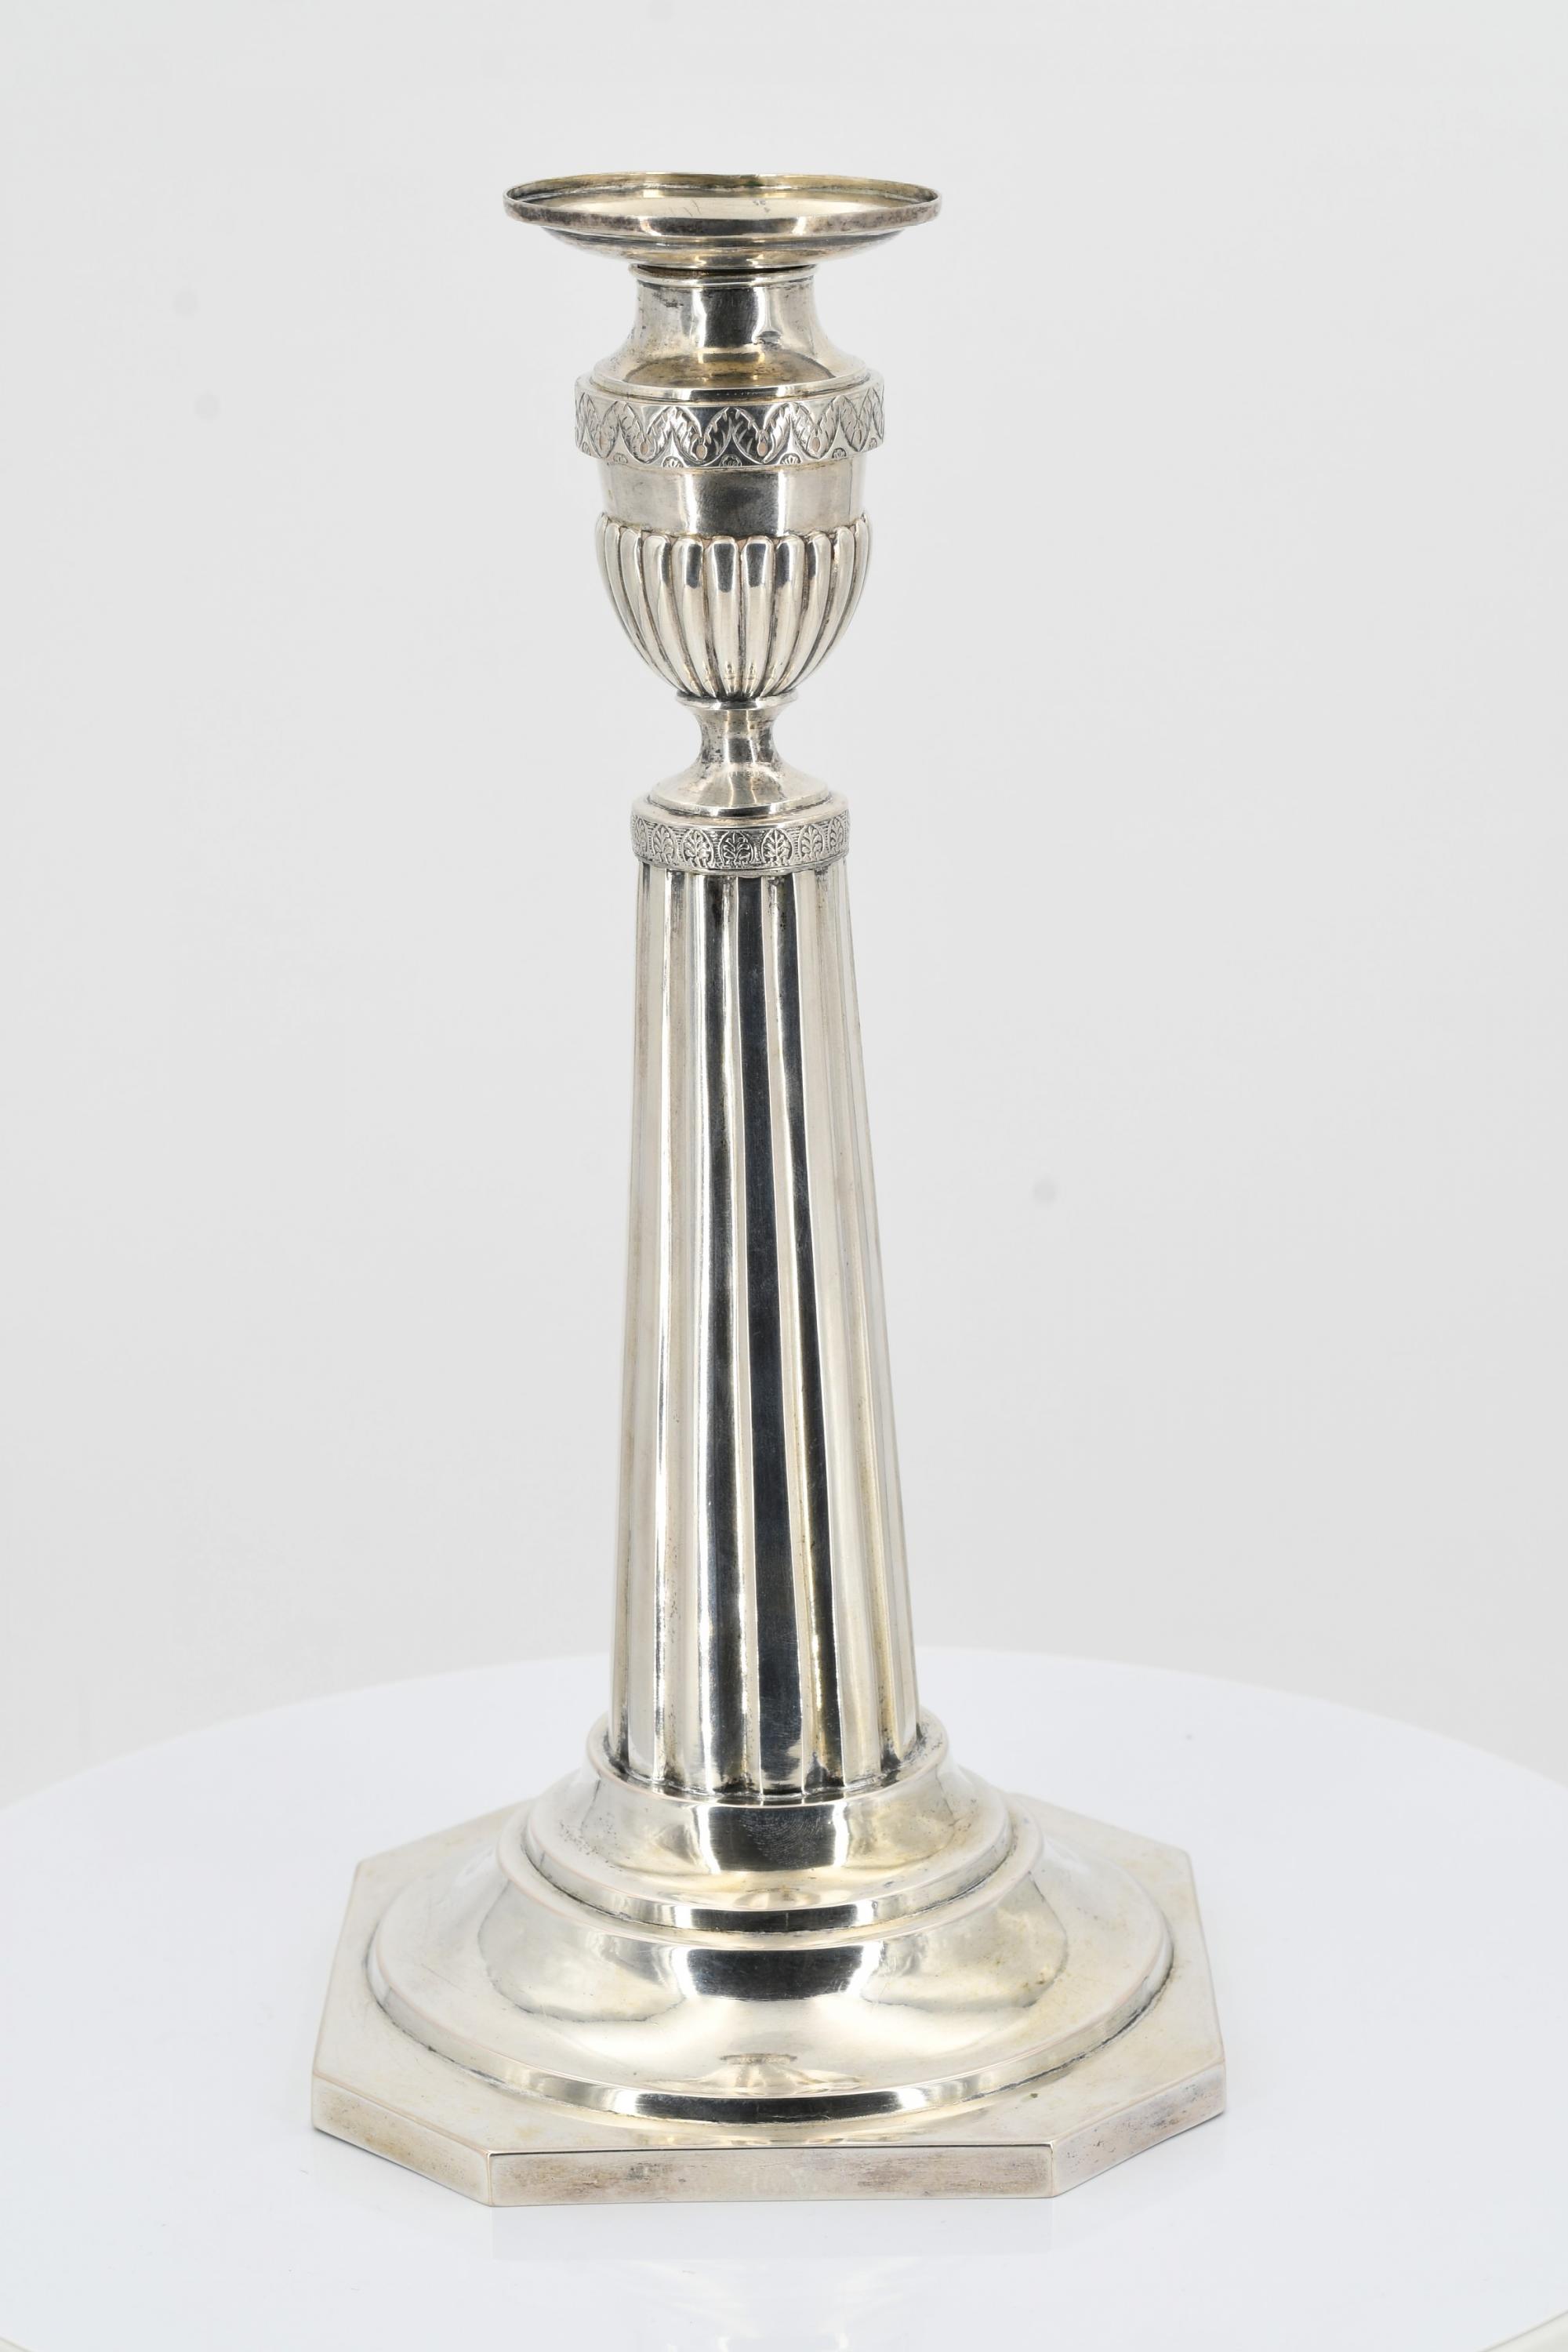 Pair of large candlesticks with fluted shafts - Image 10 of 12